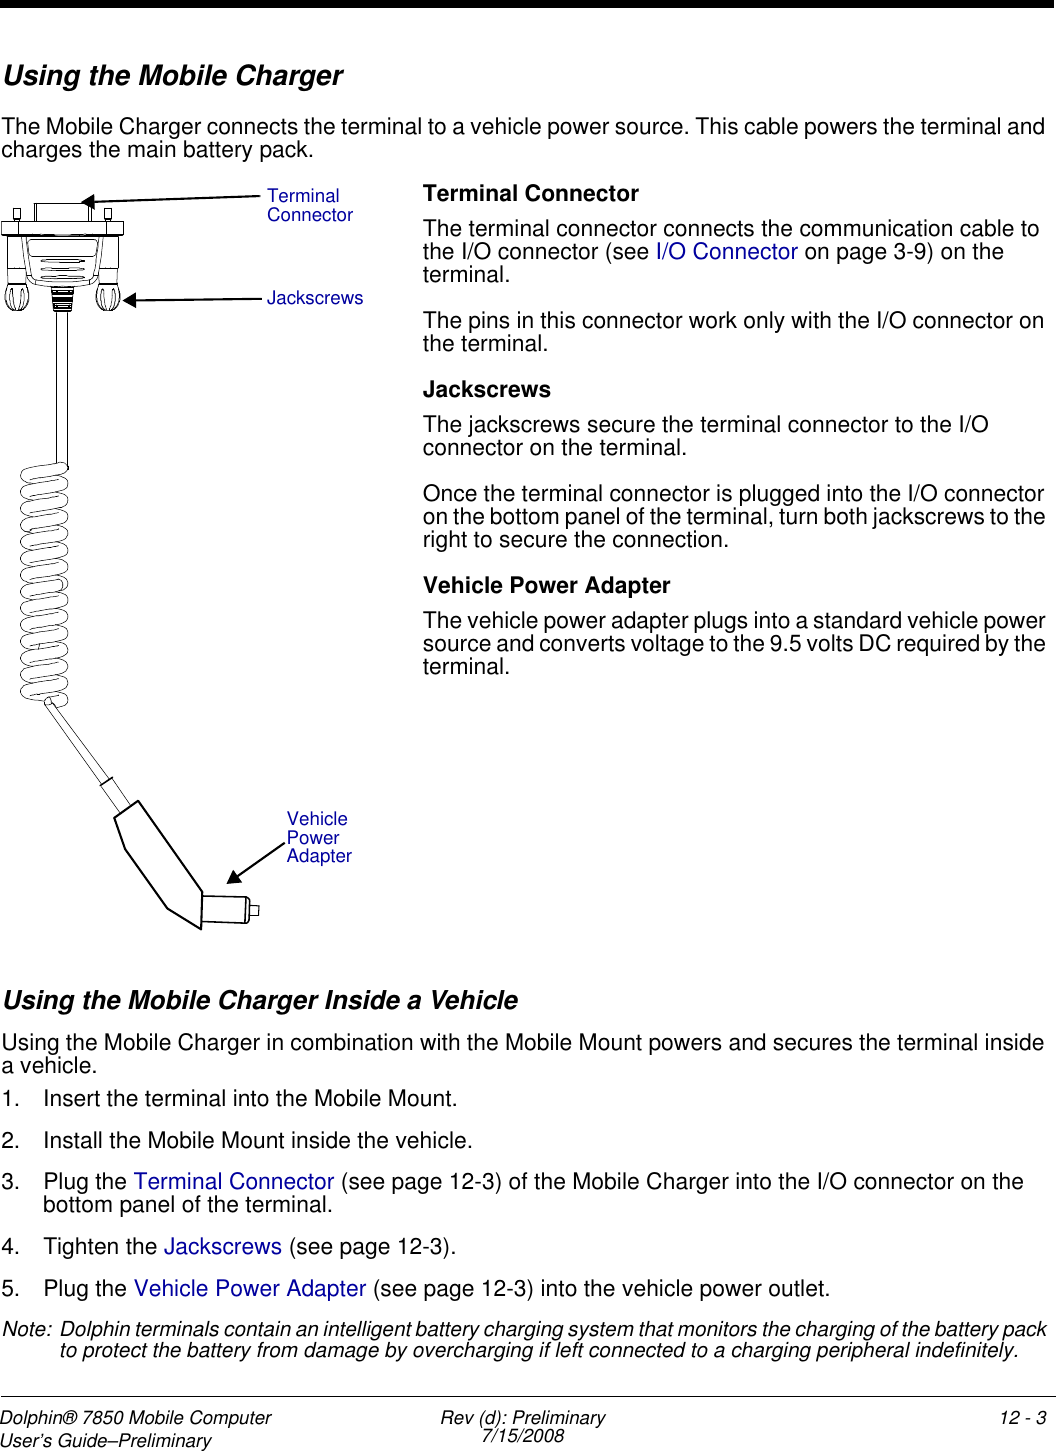 Dolphin® 7850 Mobile Computer  User’s Guide–Preliminary  Rev (d): Preliminary7/15/2008 12 - 3Using the Mobile ChargerThe Mobile Charger connects the terminal to a vehicle power source. This cable powers the terminal and charges the main battery pack.Terminal ConnectorThe terminal connector connects the communication cable to the I/O connector (see I/O Connector on page 3-9) on the terminal. The pins in this connector work only with the I/O connector on the terminal.JackscrewsThe jackscrews secure the terminal connector to the I/O connector on the terminal. Once the terminal connector is plugged into the I/O connector on the bottom panel of the terminal, turn both jackscrews to the right to secure the connection. Vehicle Power AdapterThe vehicle power adapter plugs into a standard vehicle power source and converts voltage to the 9.5 volts DC required by the terminal.Using the Mobile Charger Inside a VehicleUsing the Mobile Charger in combination with the Mobile Mount powers and secures the terminal inside a vehicle. 1. Insert the terminal into the Mobile Mount.2. Install the Mobile Mount inside the vehicle.3. Plug the Terminal Connector (see page 12-3) of the Mobile Charger into the I/O connector on the bottom panel of the terminal.4. Tighten the Jackscrews (see page 12-3).5. Plug the Vehicle Power Adapter (see page 12-3) into the vehicle power outlet.Note: Dolphin terminals contain an intelligent battery charging system that monitors the charging of the battery pack to protect the battery from damage by overcharging if left connected to a charging peripheral indefinitely. Terminal ConnectorJackscrewsVehicle Power Adapter